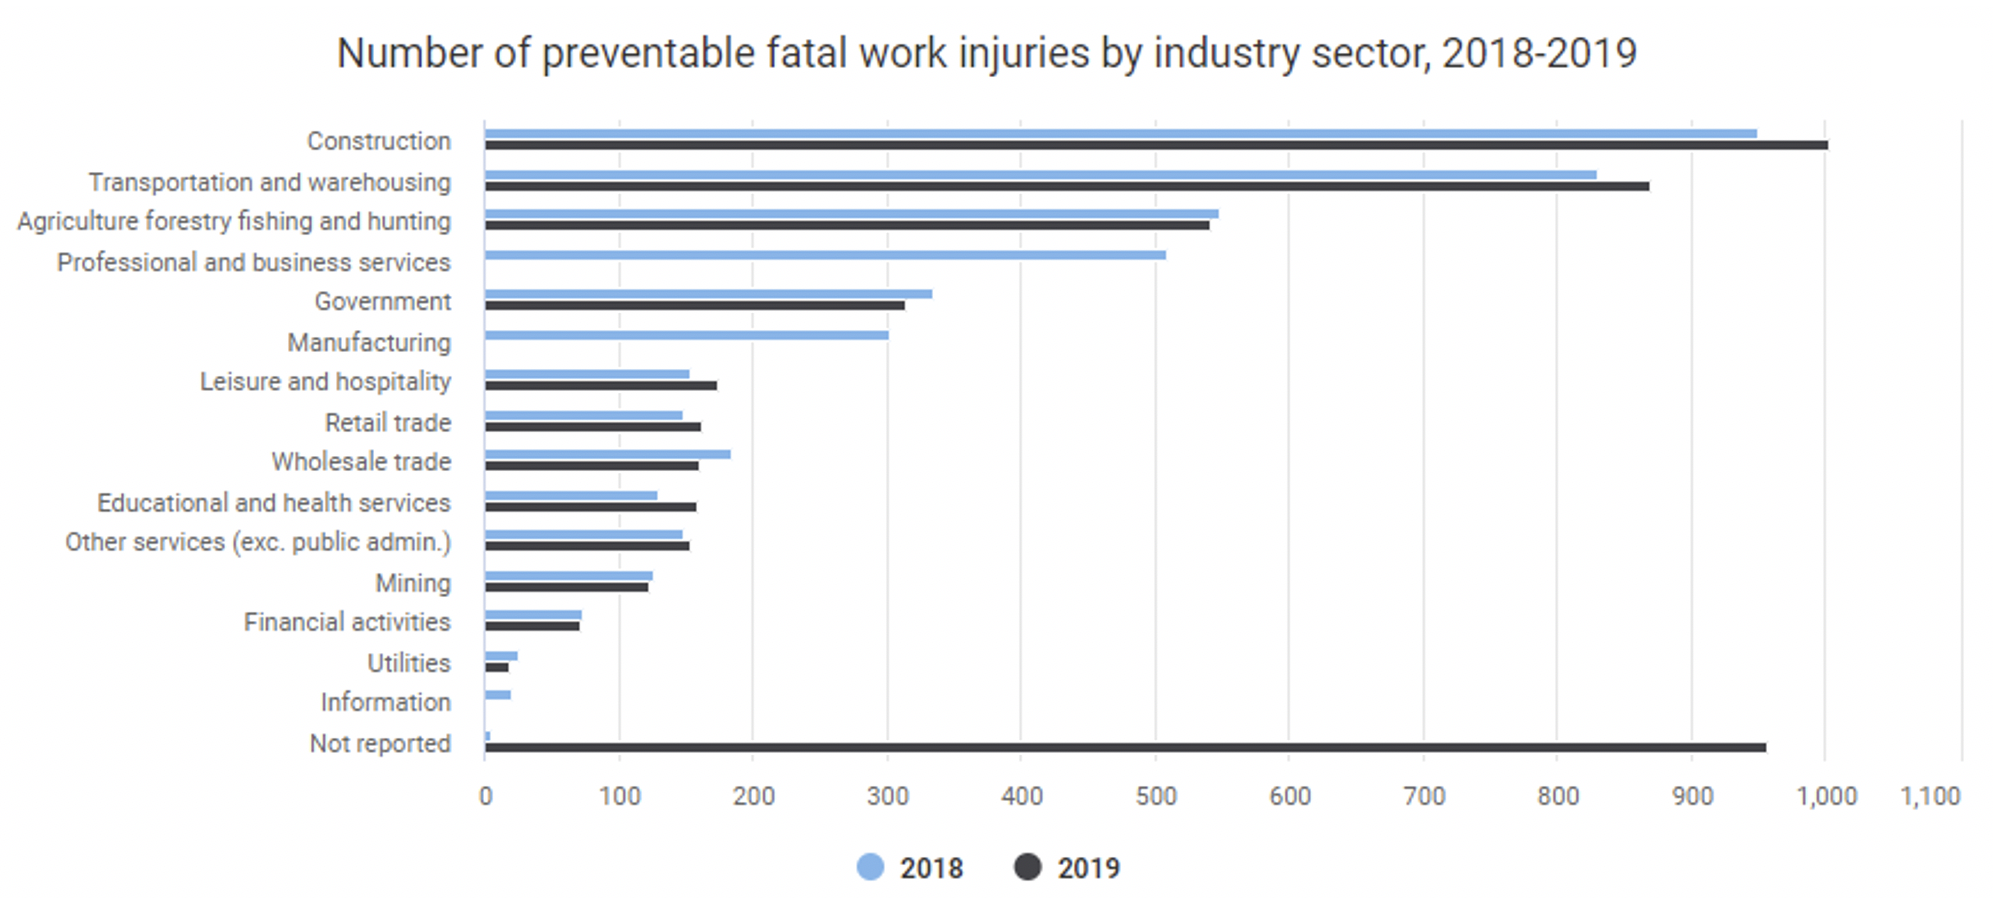 Preventable work injuries per sector